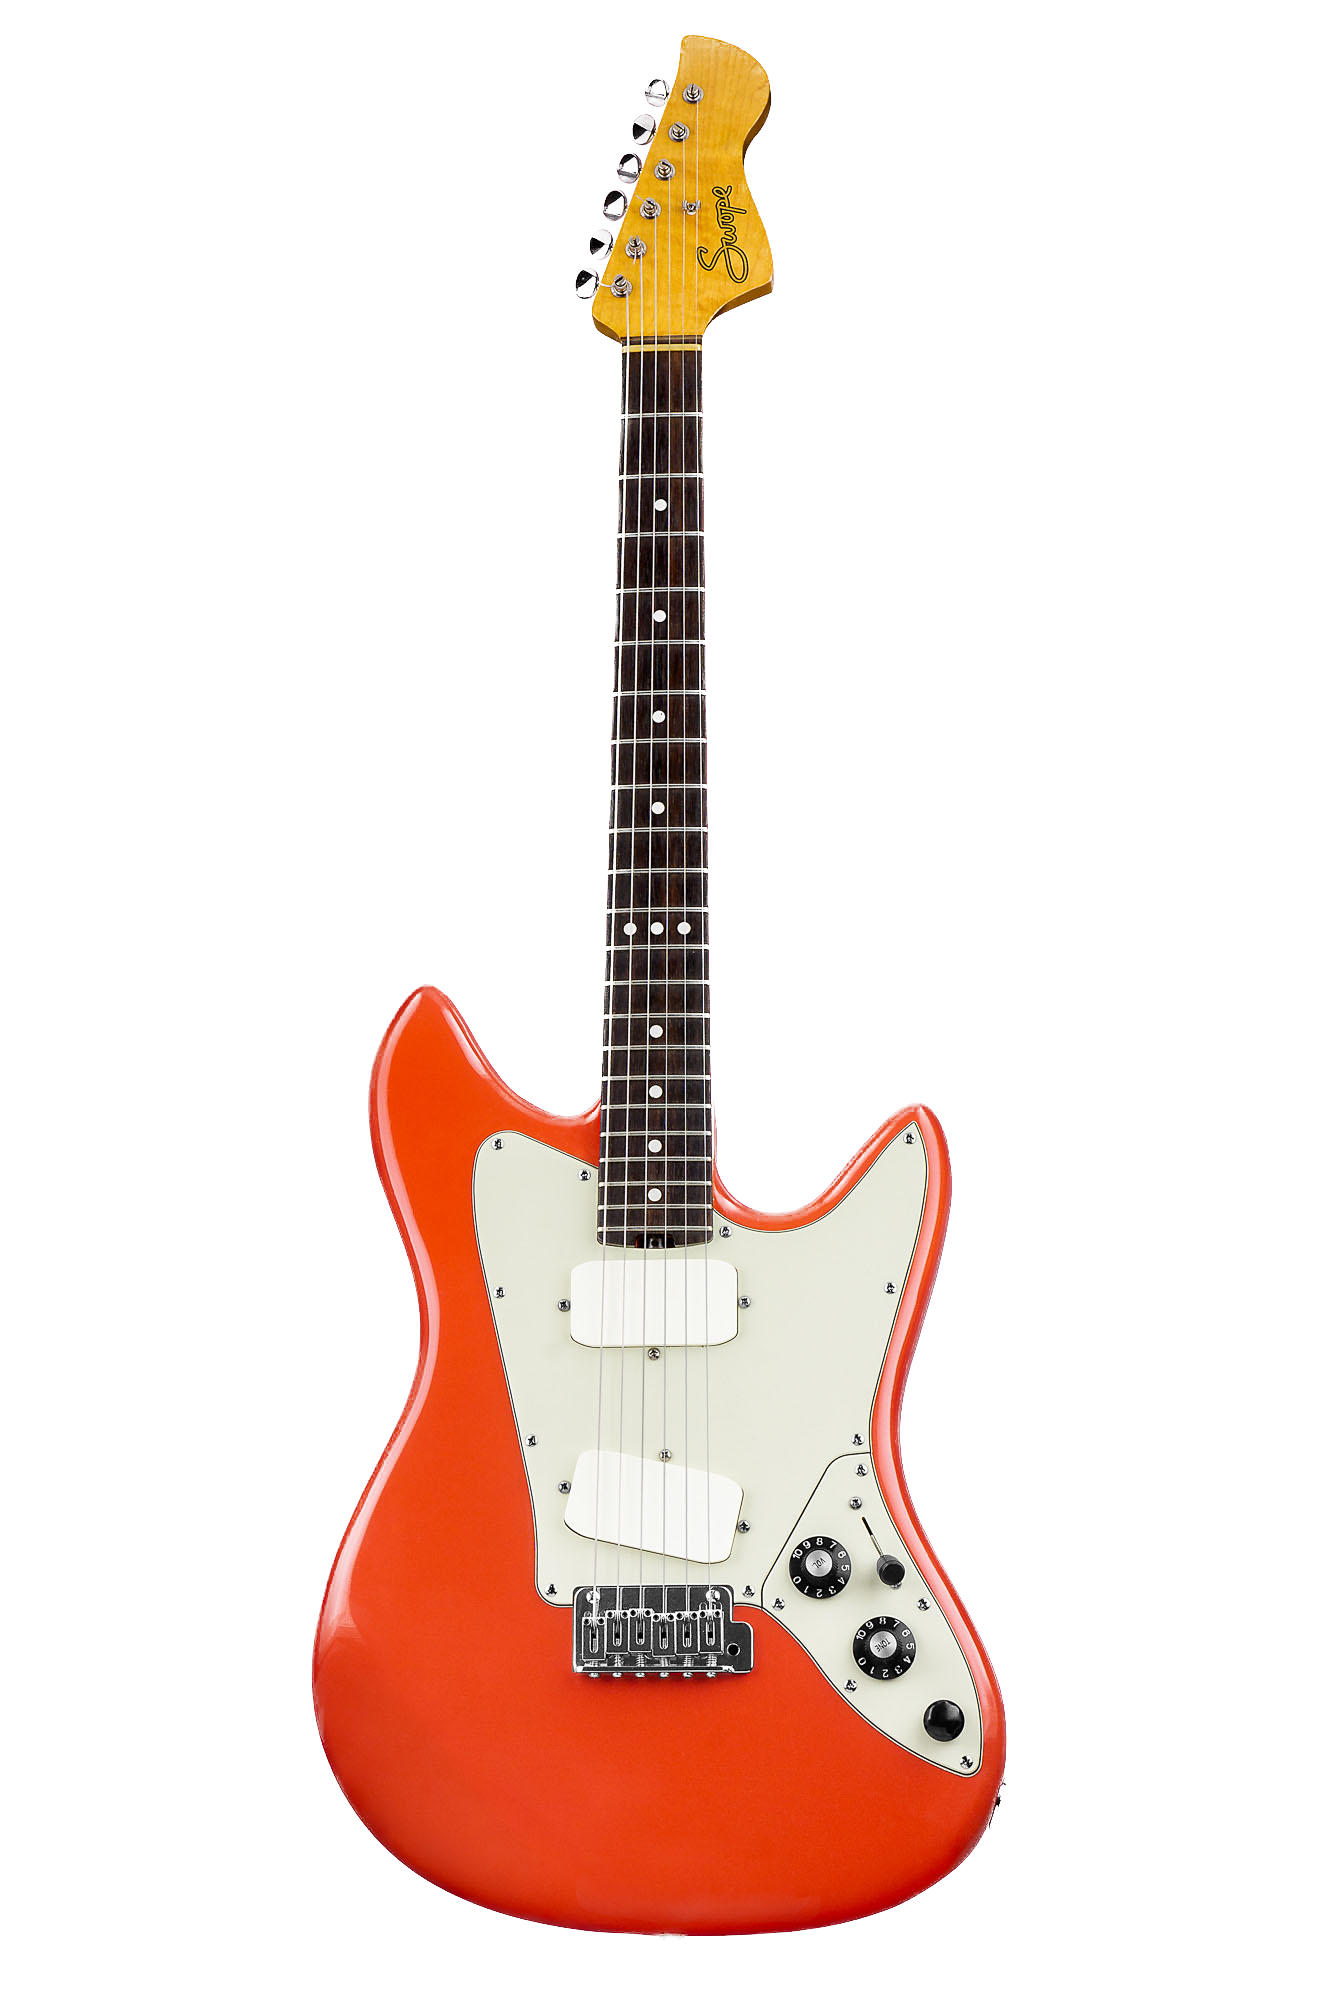 Red Geronimo electric guitar.